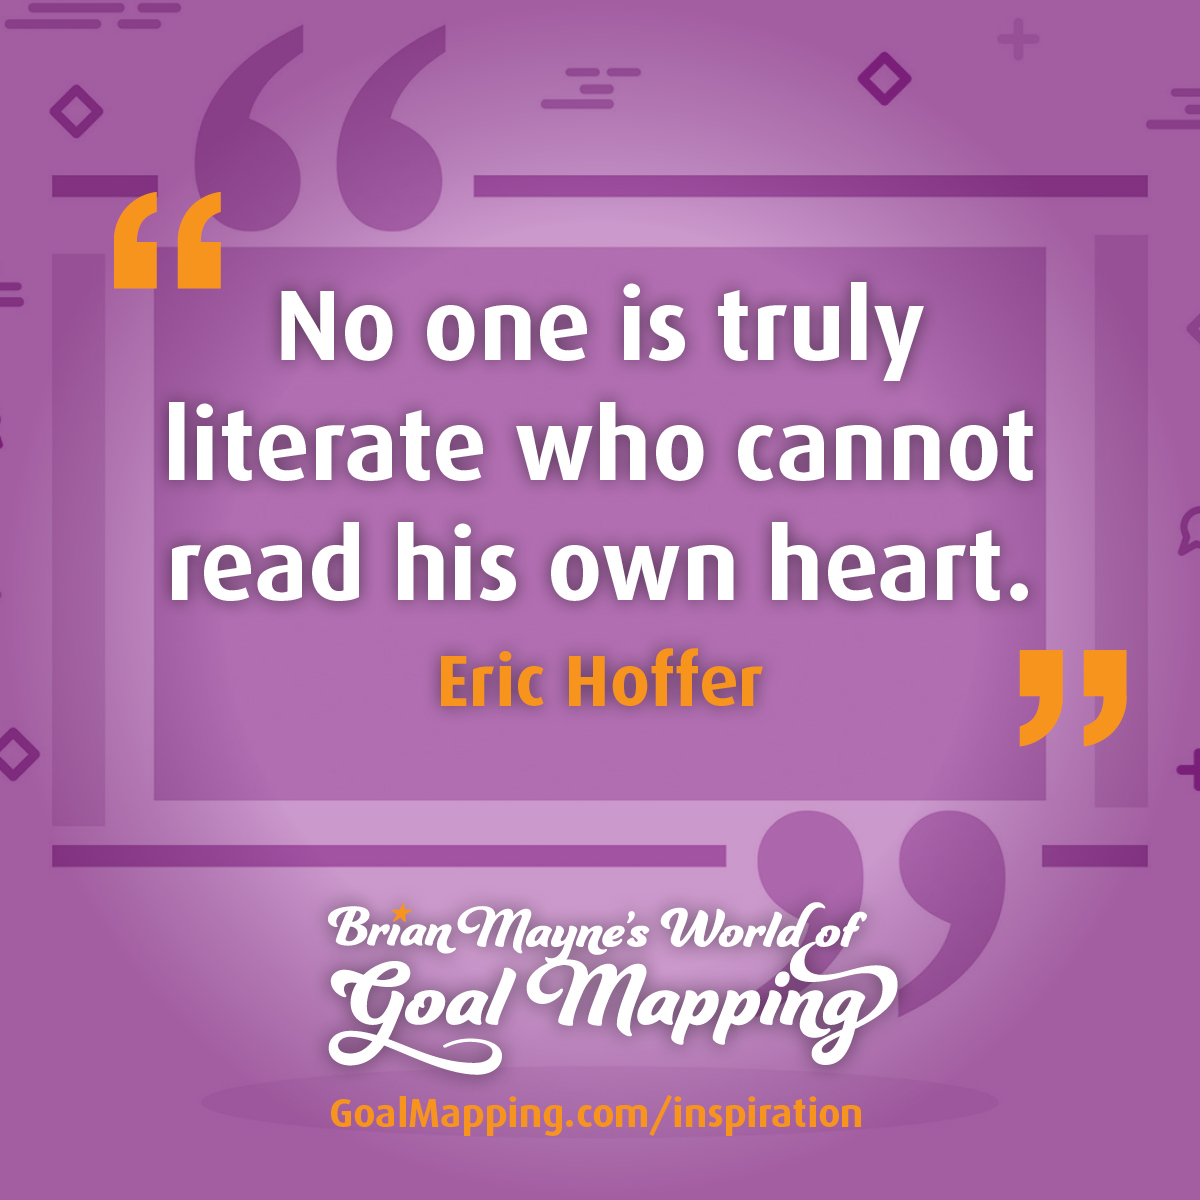 "No one is truly literate who cannot read his own heart." Eric Hoffer